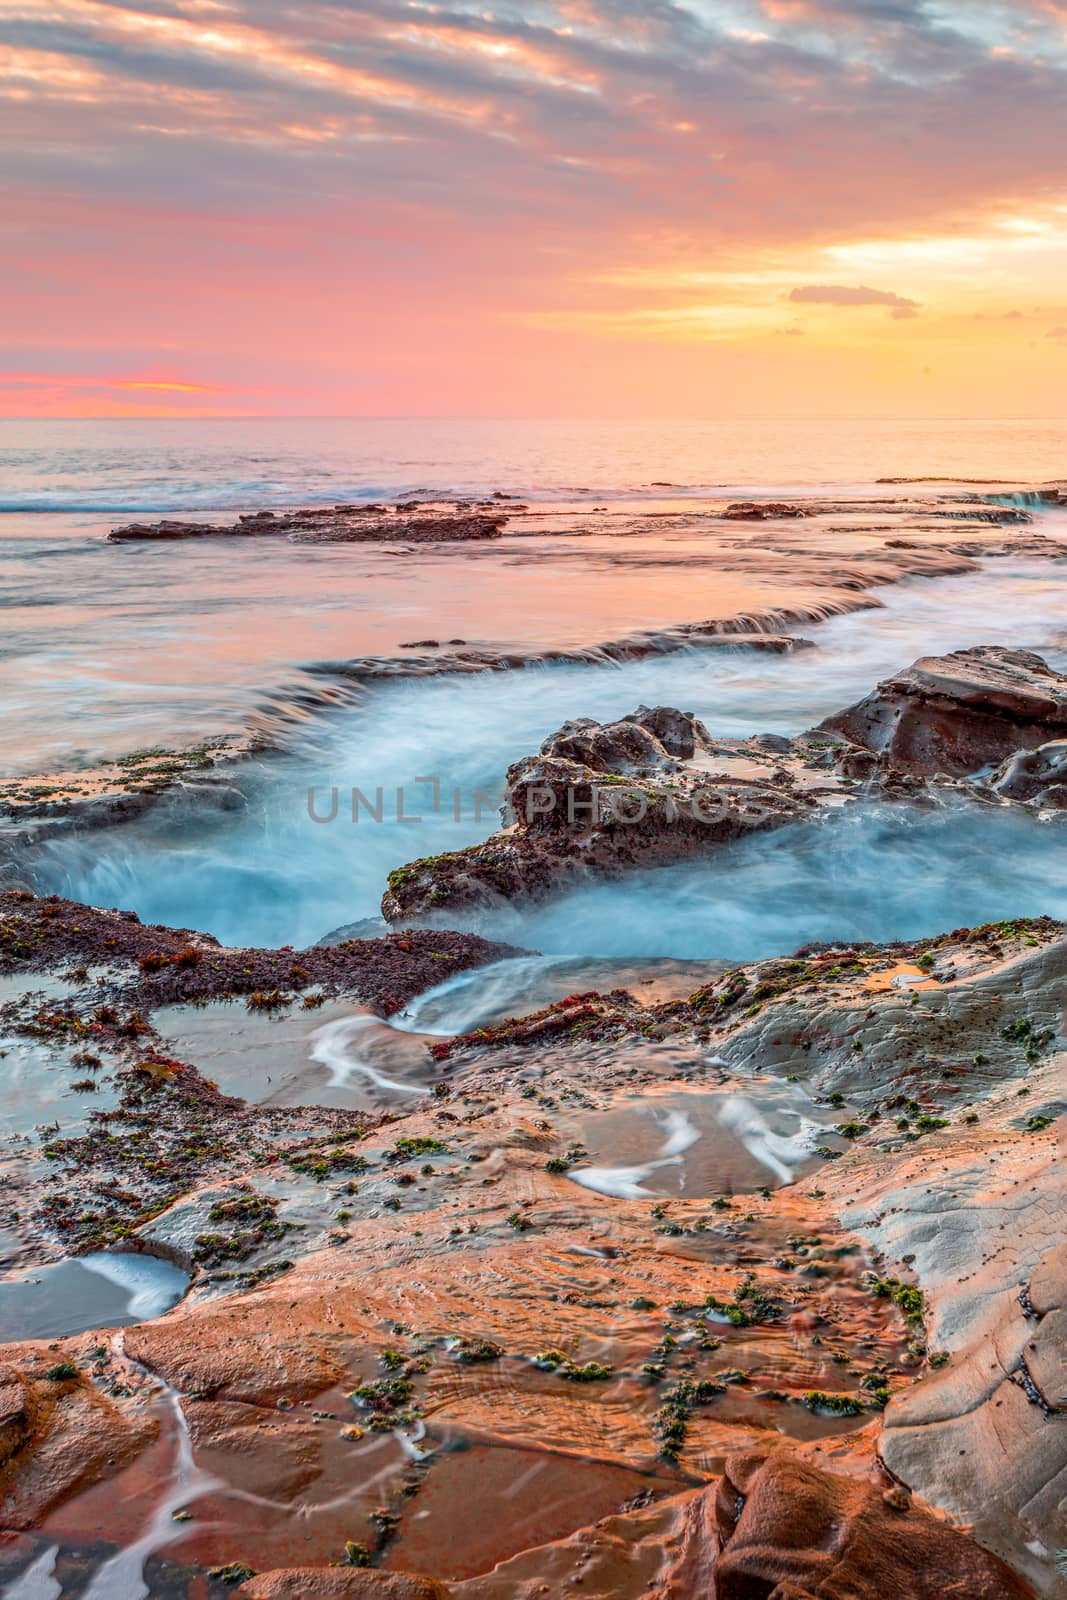 Ocean flowing into coastal channels eroded into rock and a stunning sunrise by lovleah